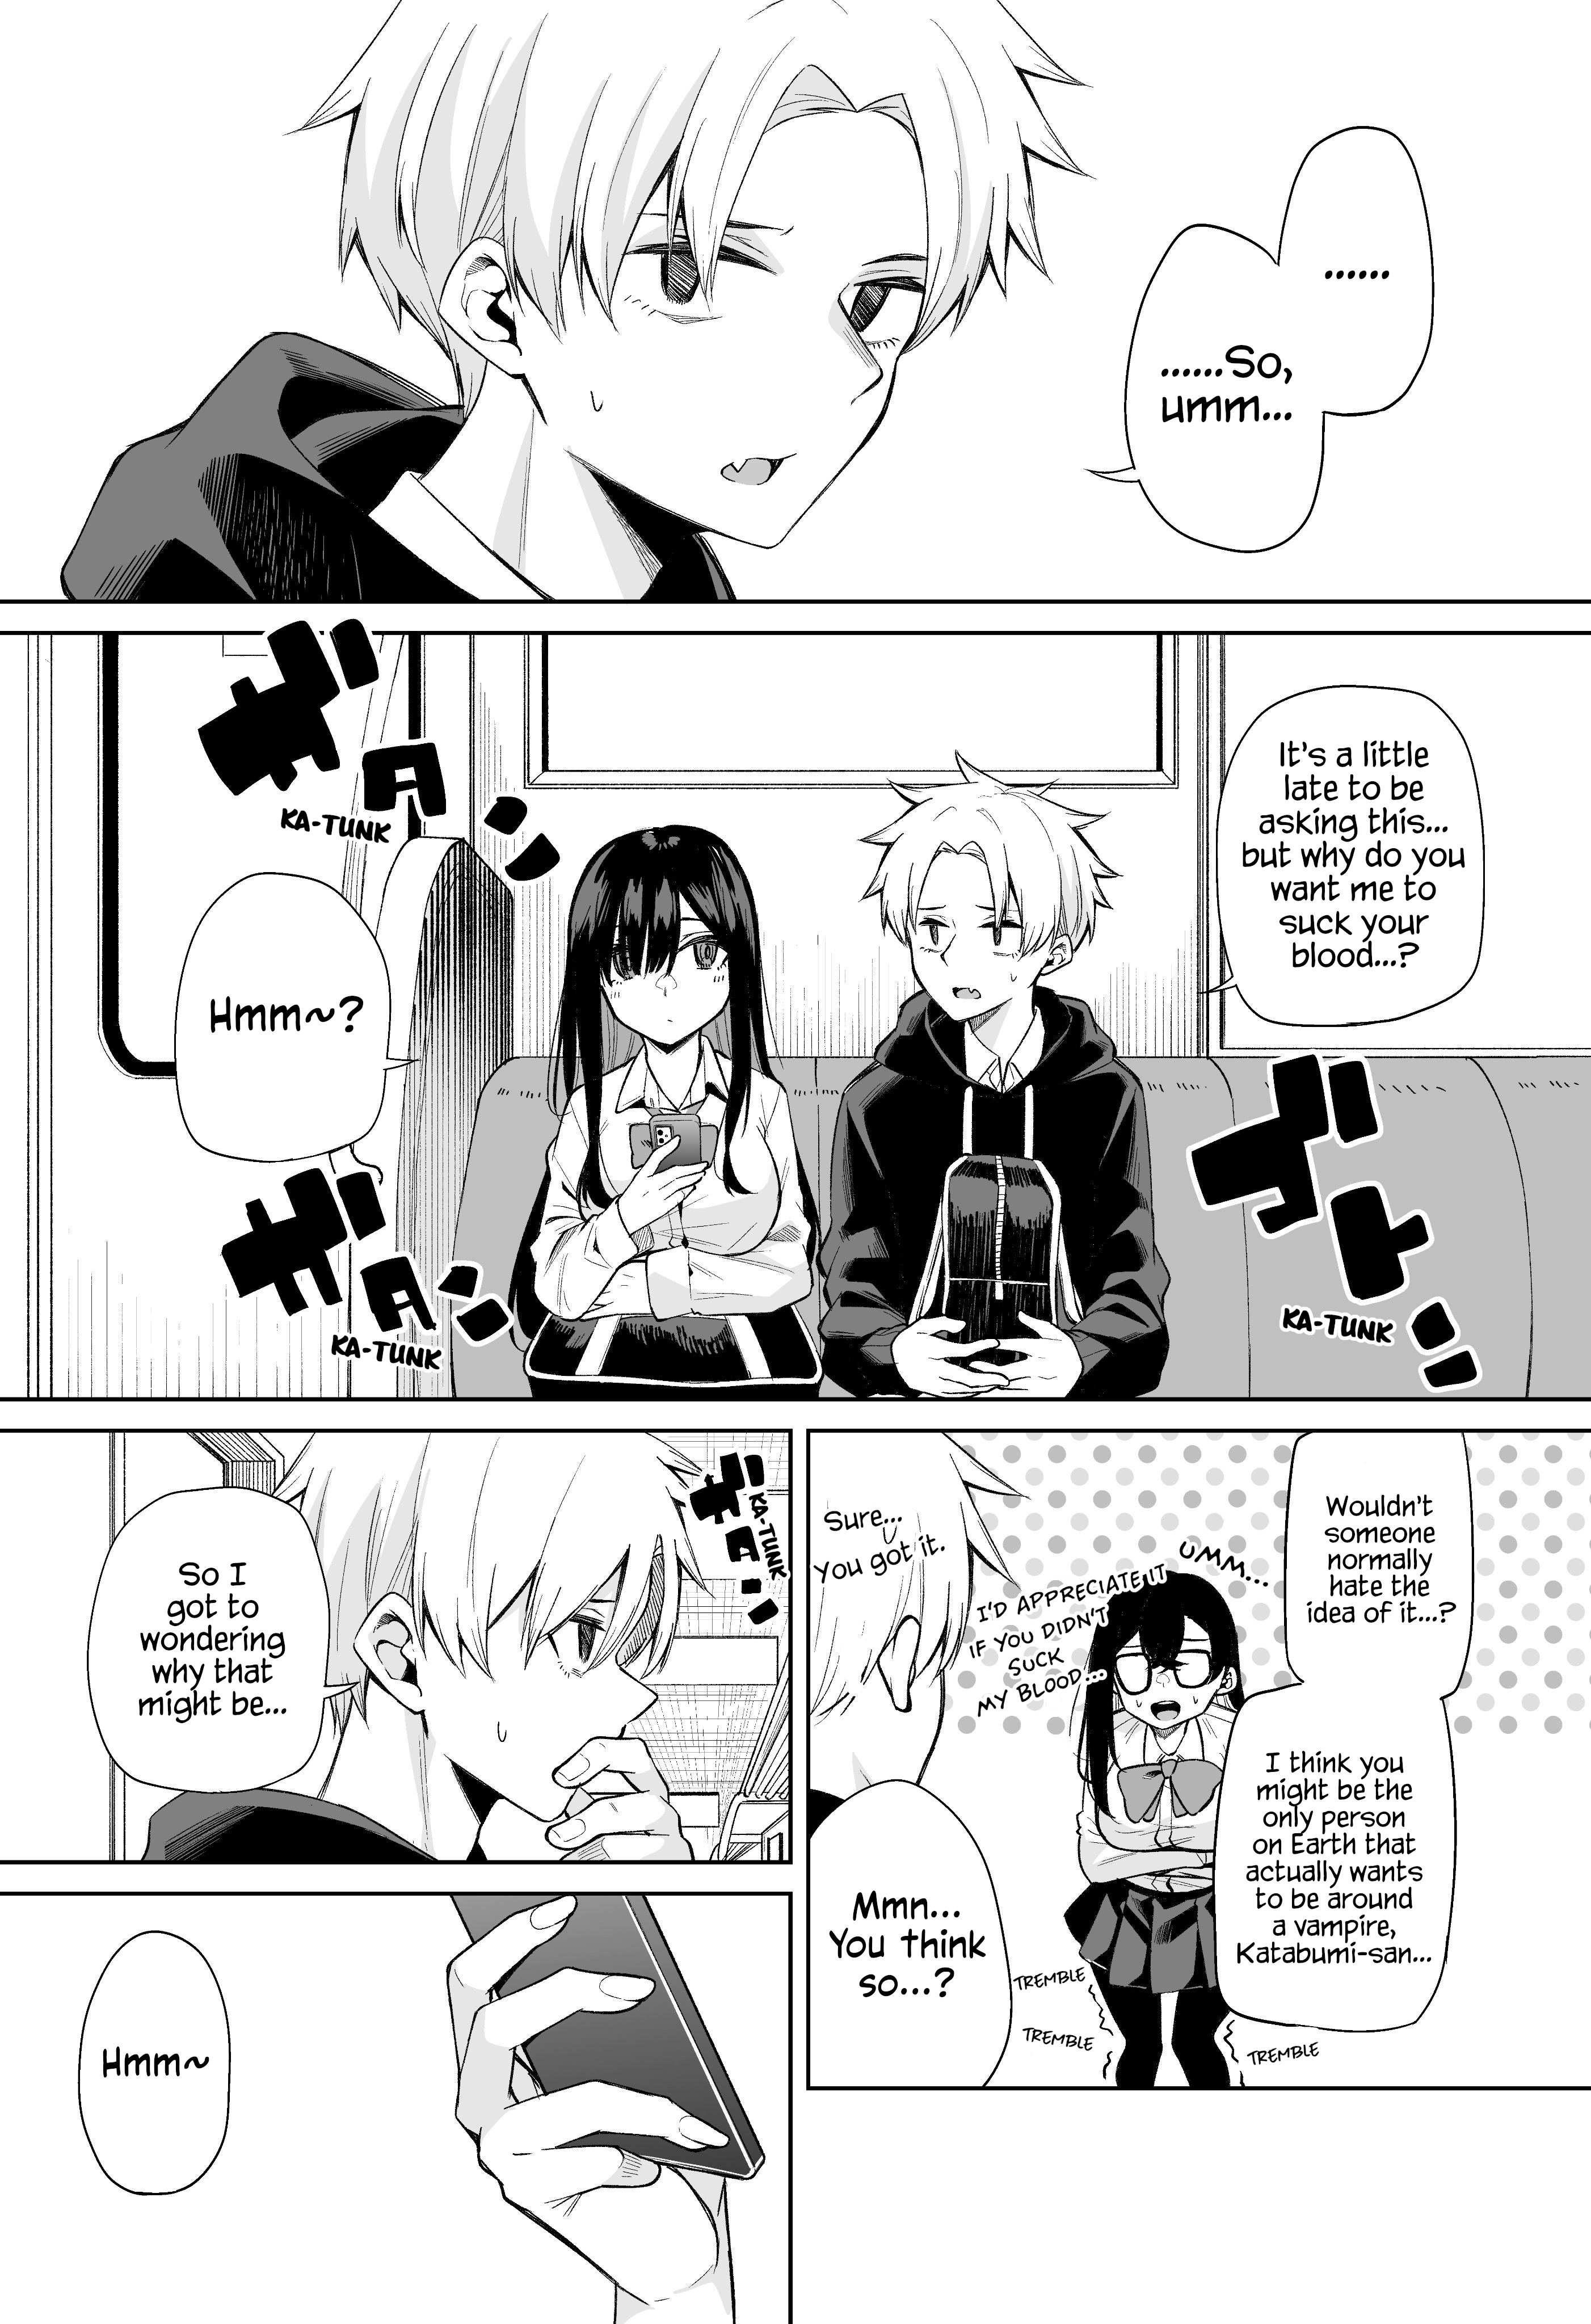 Katabami-San Wants To Get Sucked By A Vampire. - Page 1